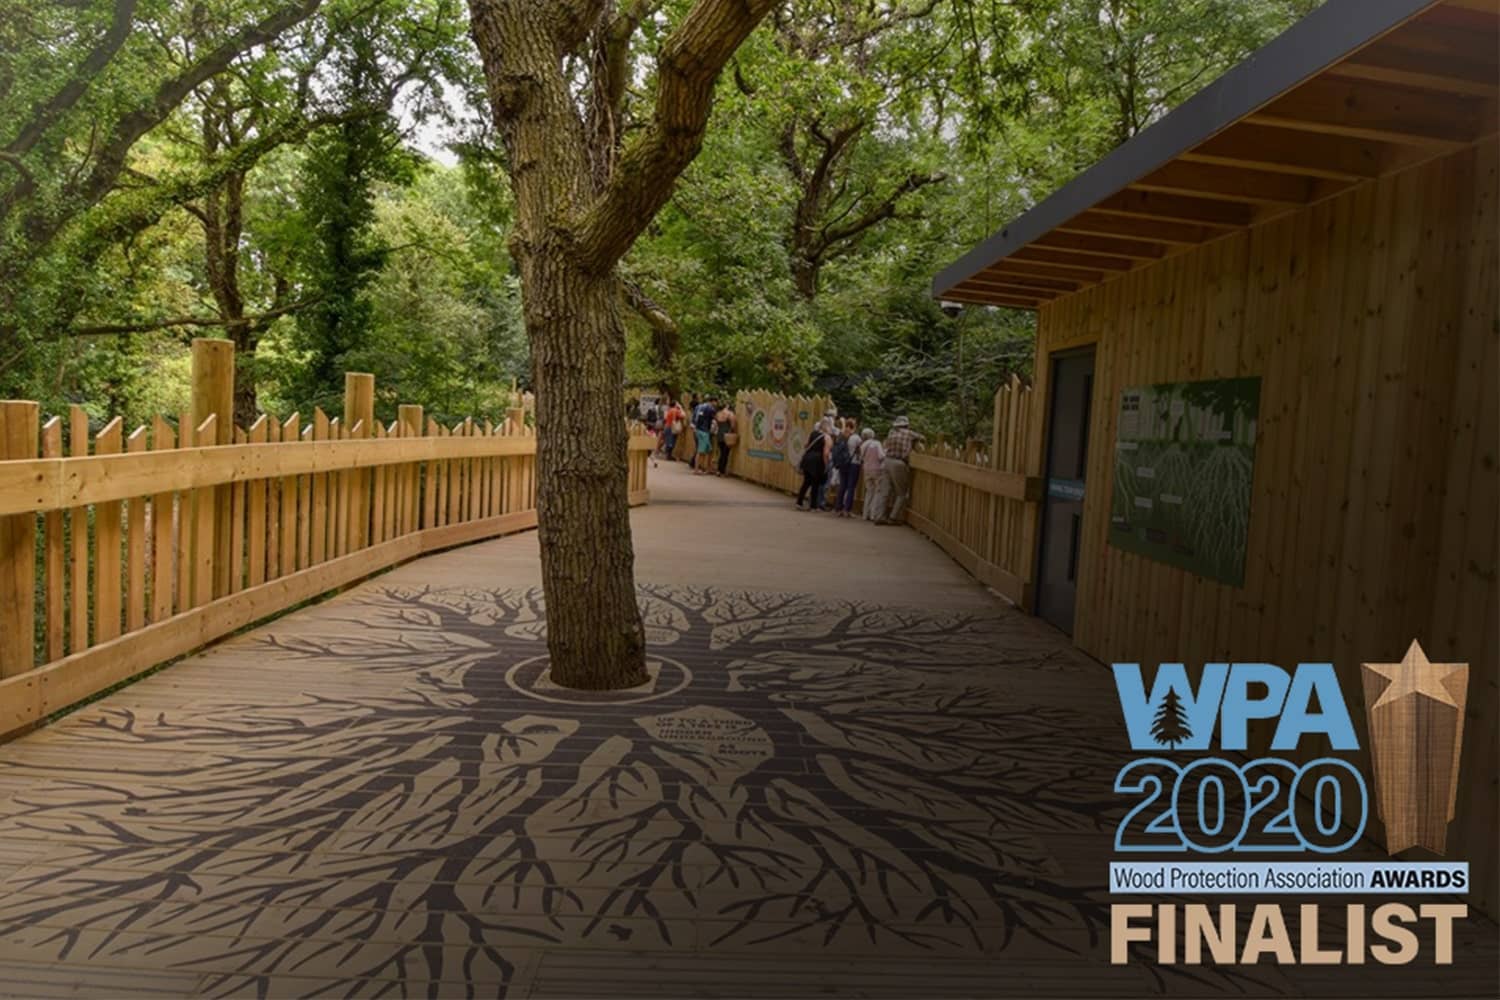 Gripsure announced as finalist for Wood Protection Association Awards 2020